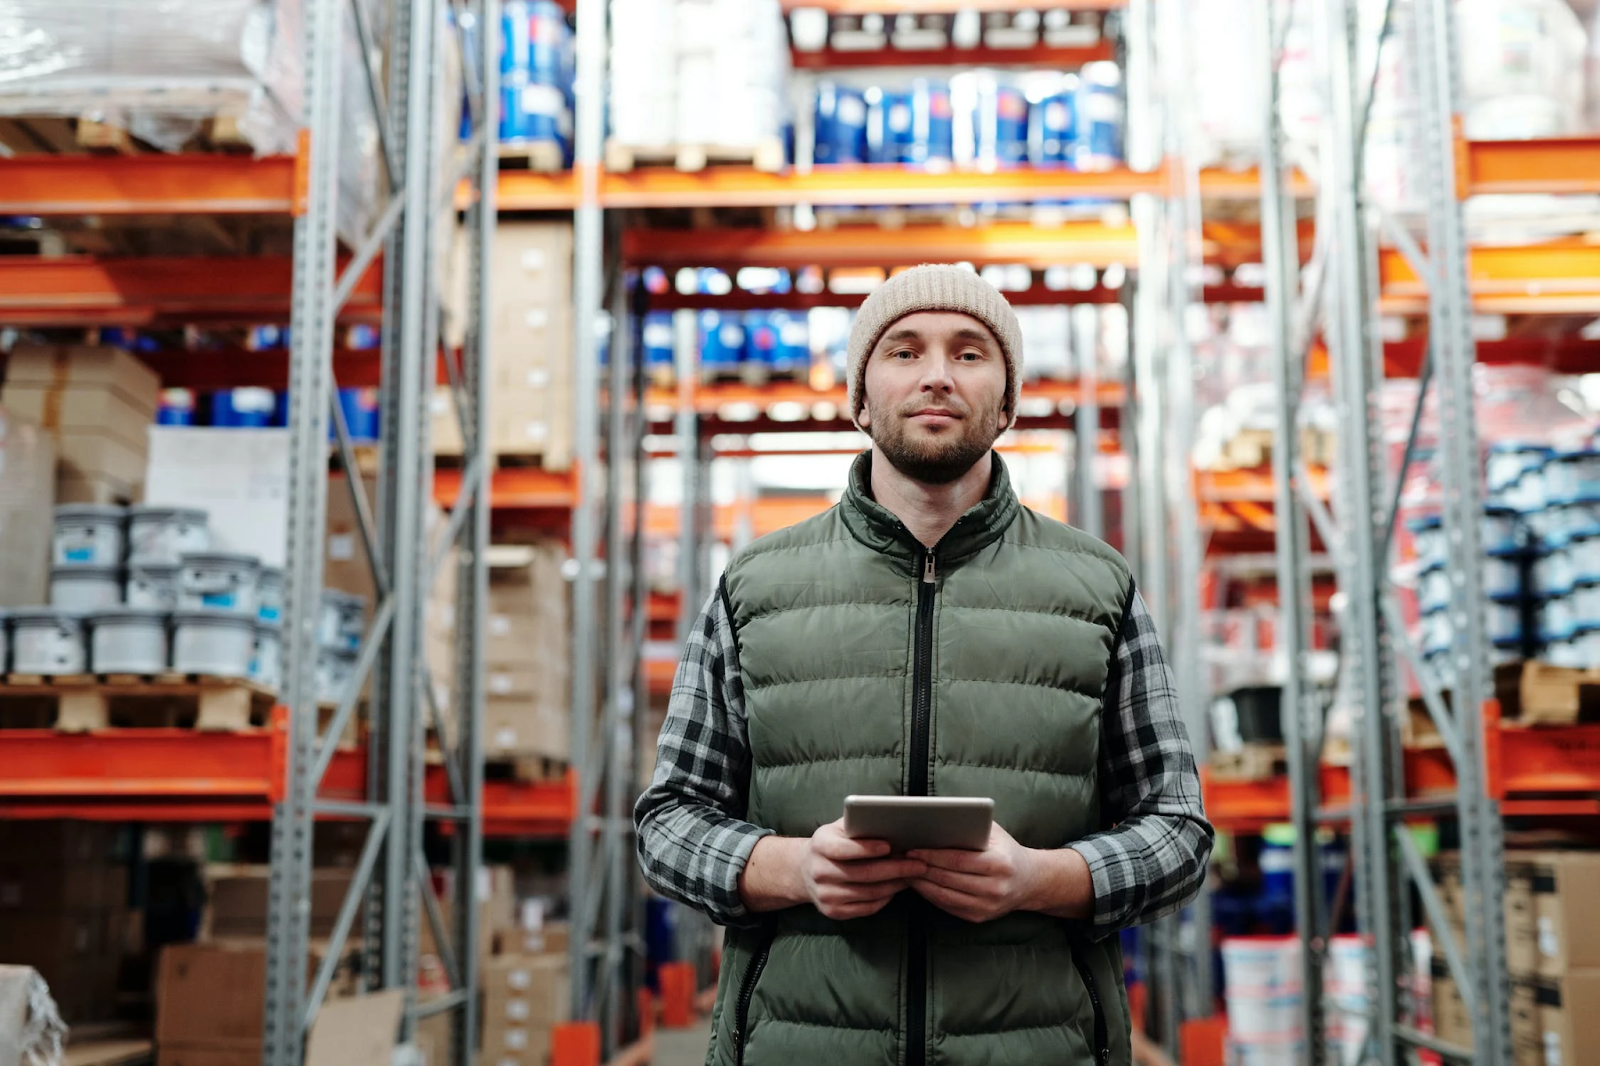 outsourcing fulfillment warehouse worker